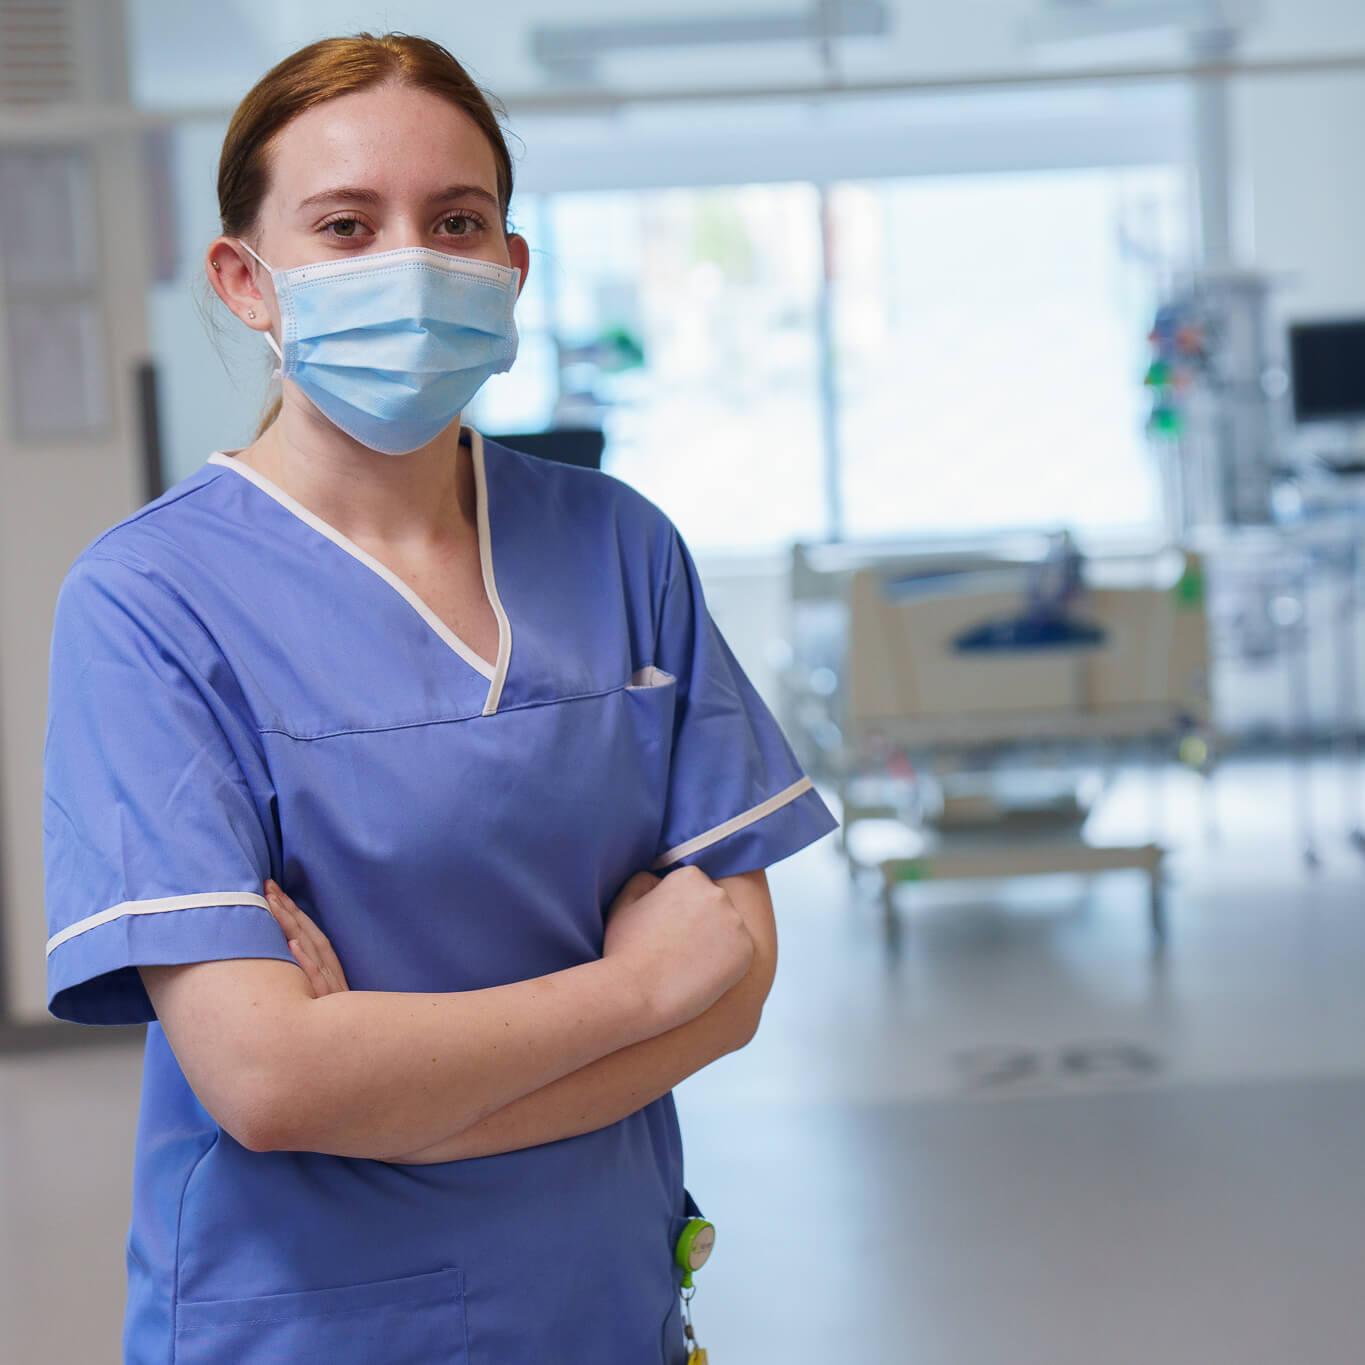 A female healthcare professional wearing a blue scrub and a surgical mask, standing with crossed arms in a hospital setting with medical equipment in the background.